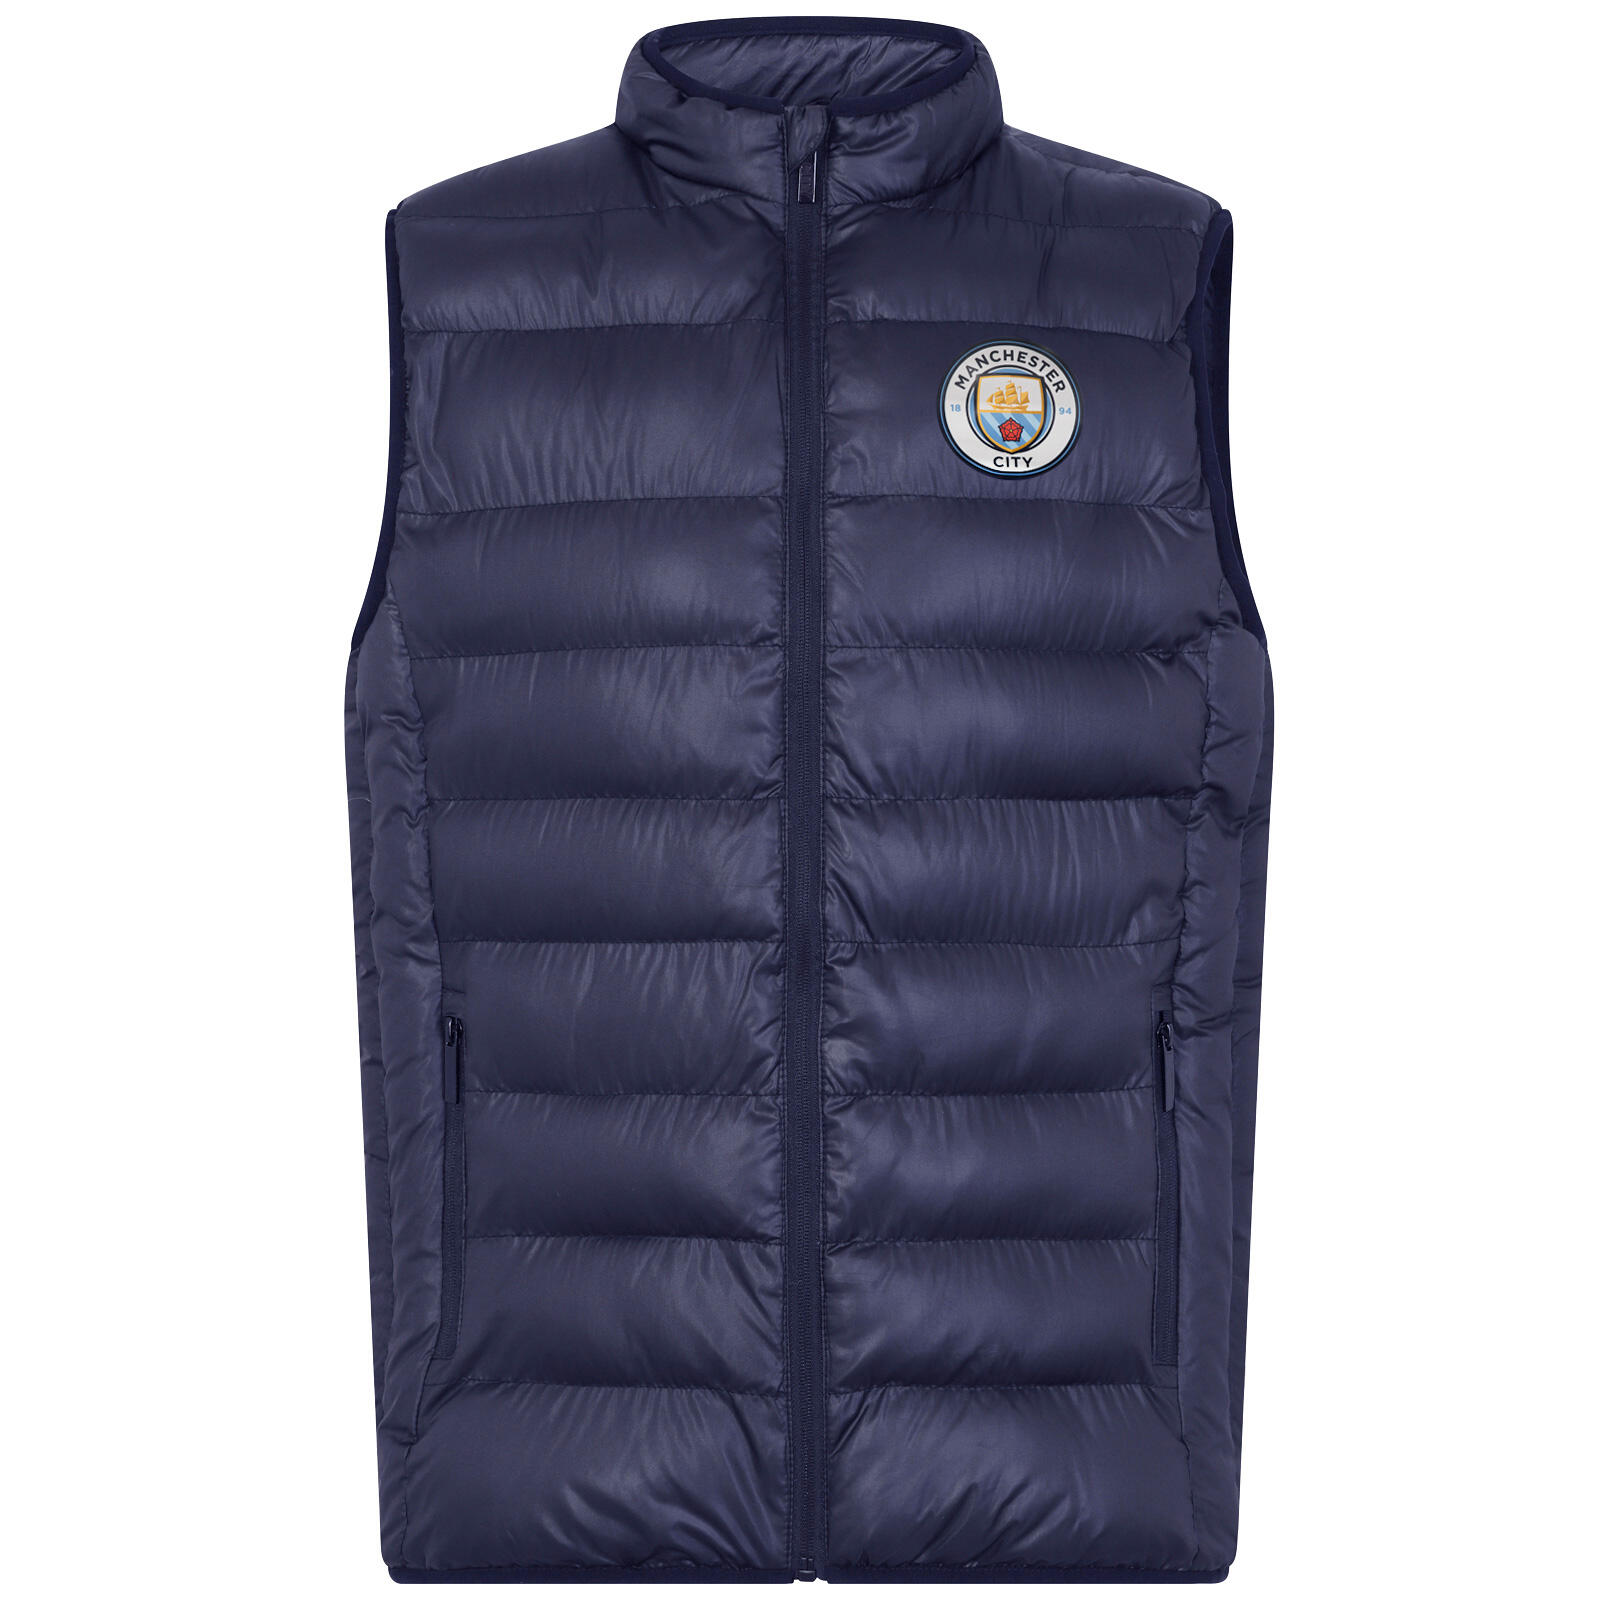 Manchester City Boys Gilet Jacket Body Warmer Padded Kids OFFICIAL Gift 1/4